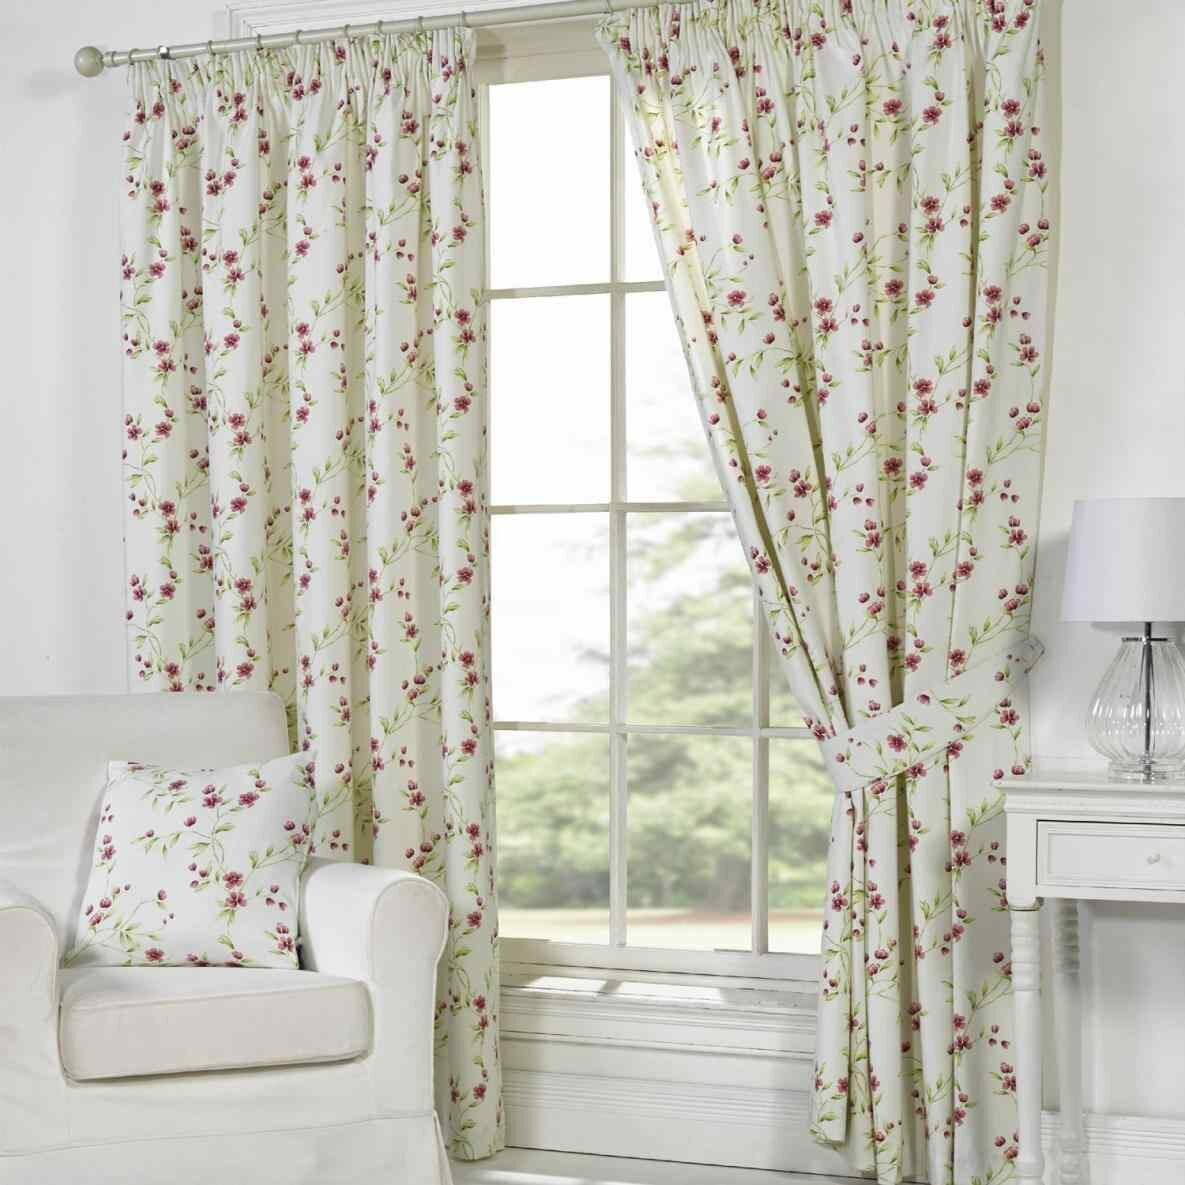 Cheapest Thermal Curtains | Thick Blackout Curtains | Cheap Blackout Curtains